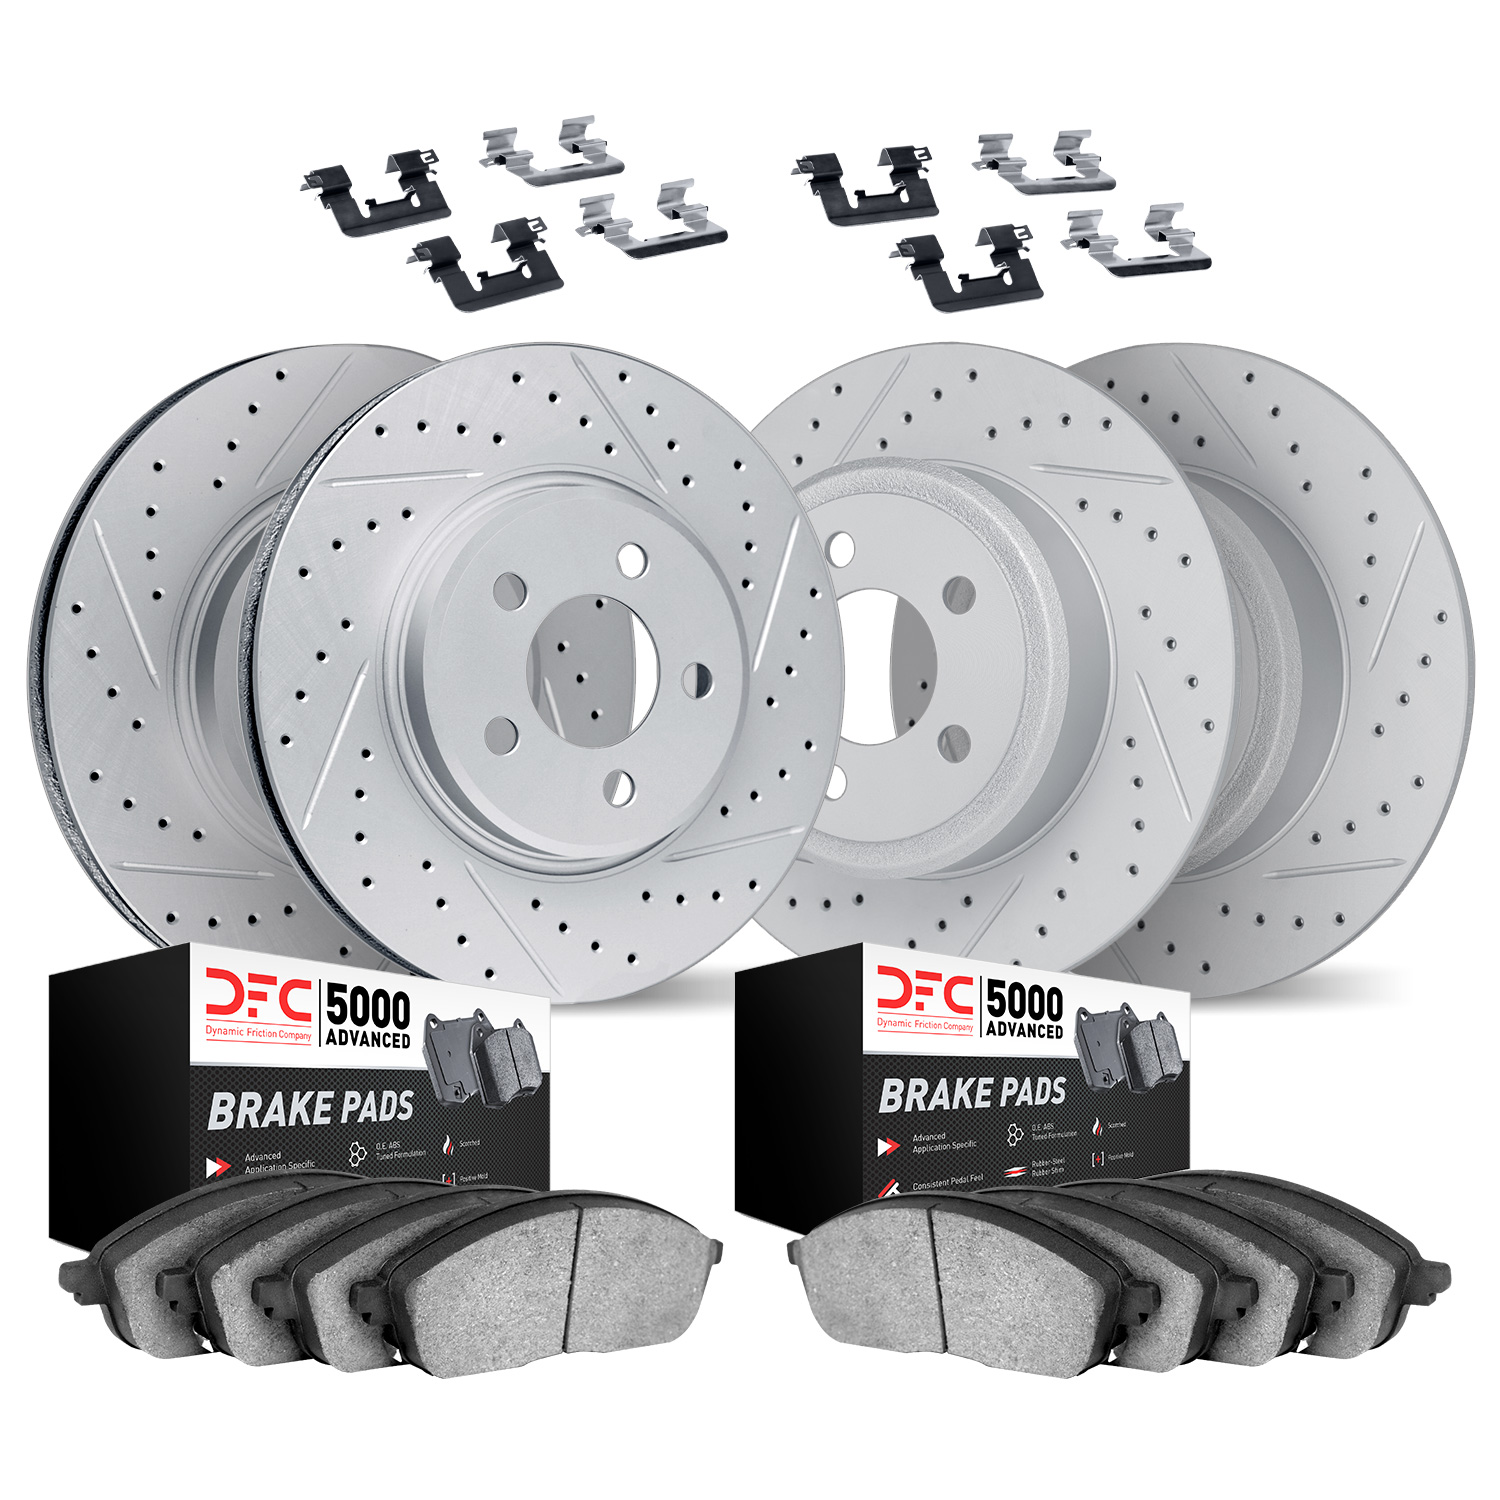 2514-45010 Geoperformance Drilled/Slotted Rotors w/5000 Advanced Brake Pads Kit & Hardware, 2006-2010 GM, Position: Front and Re